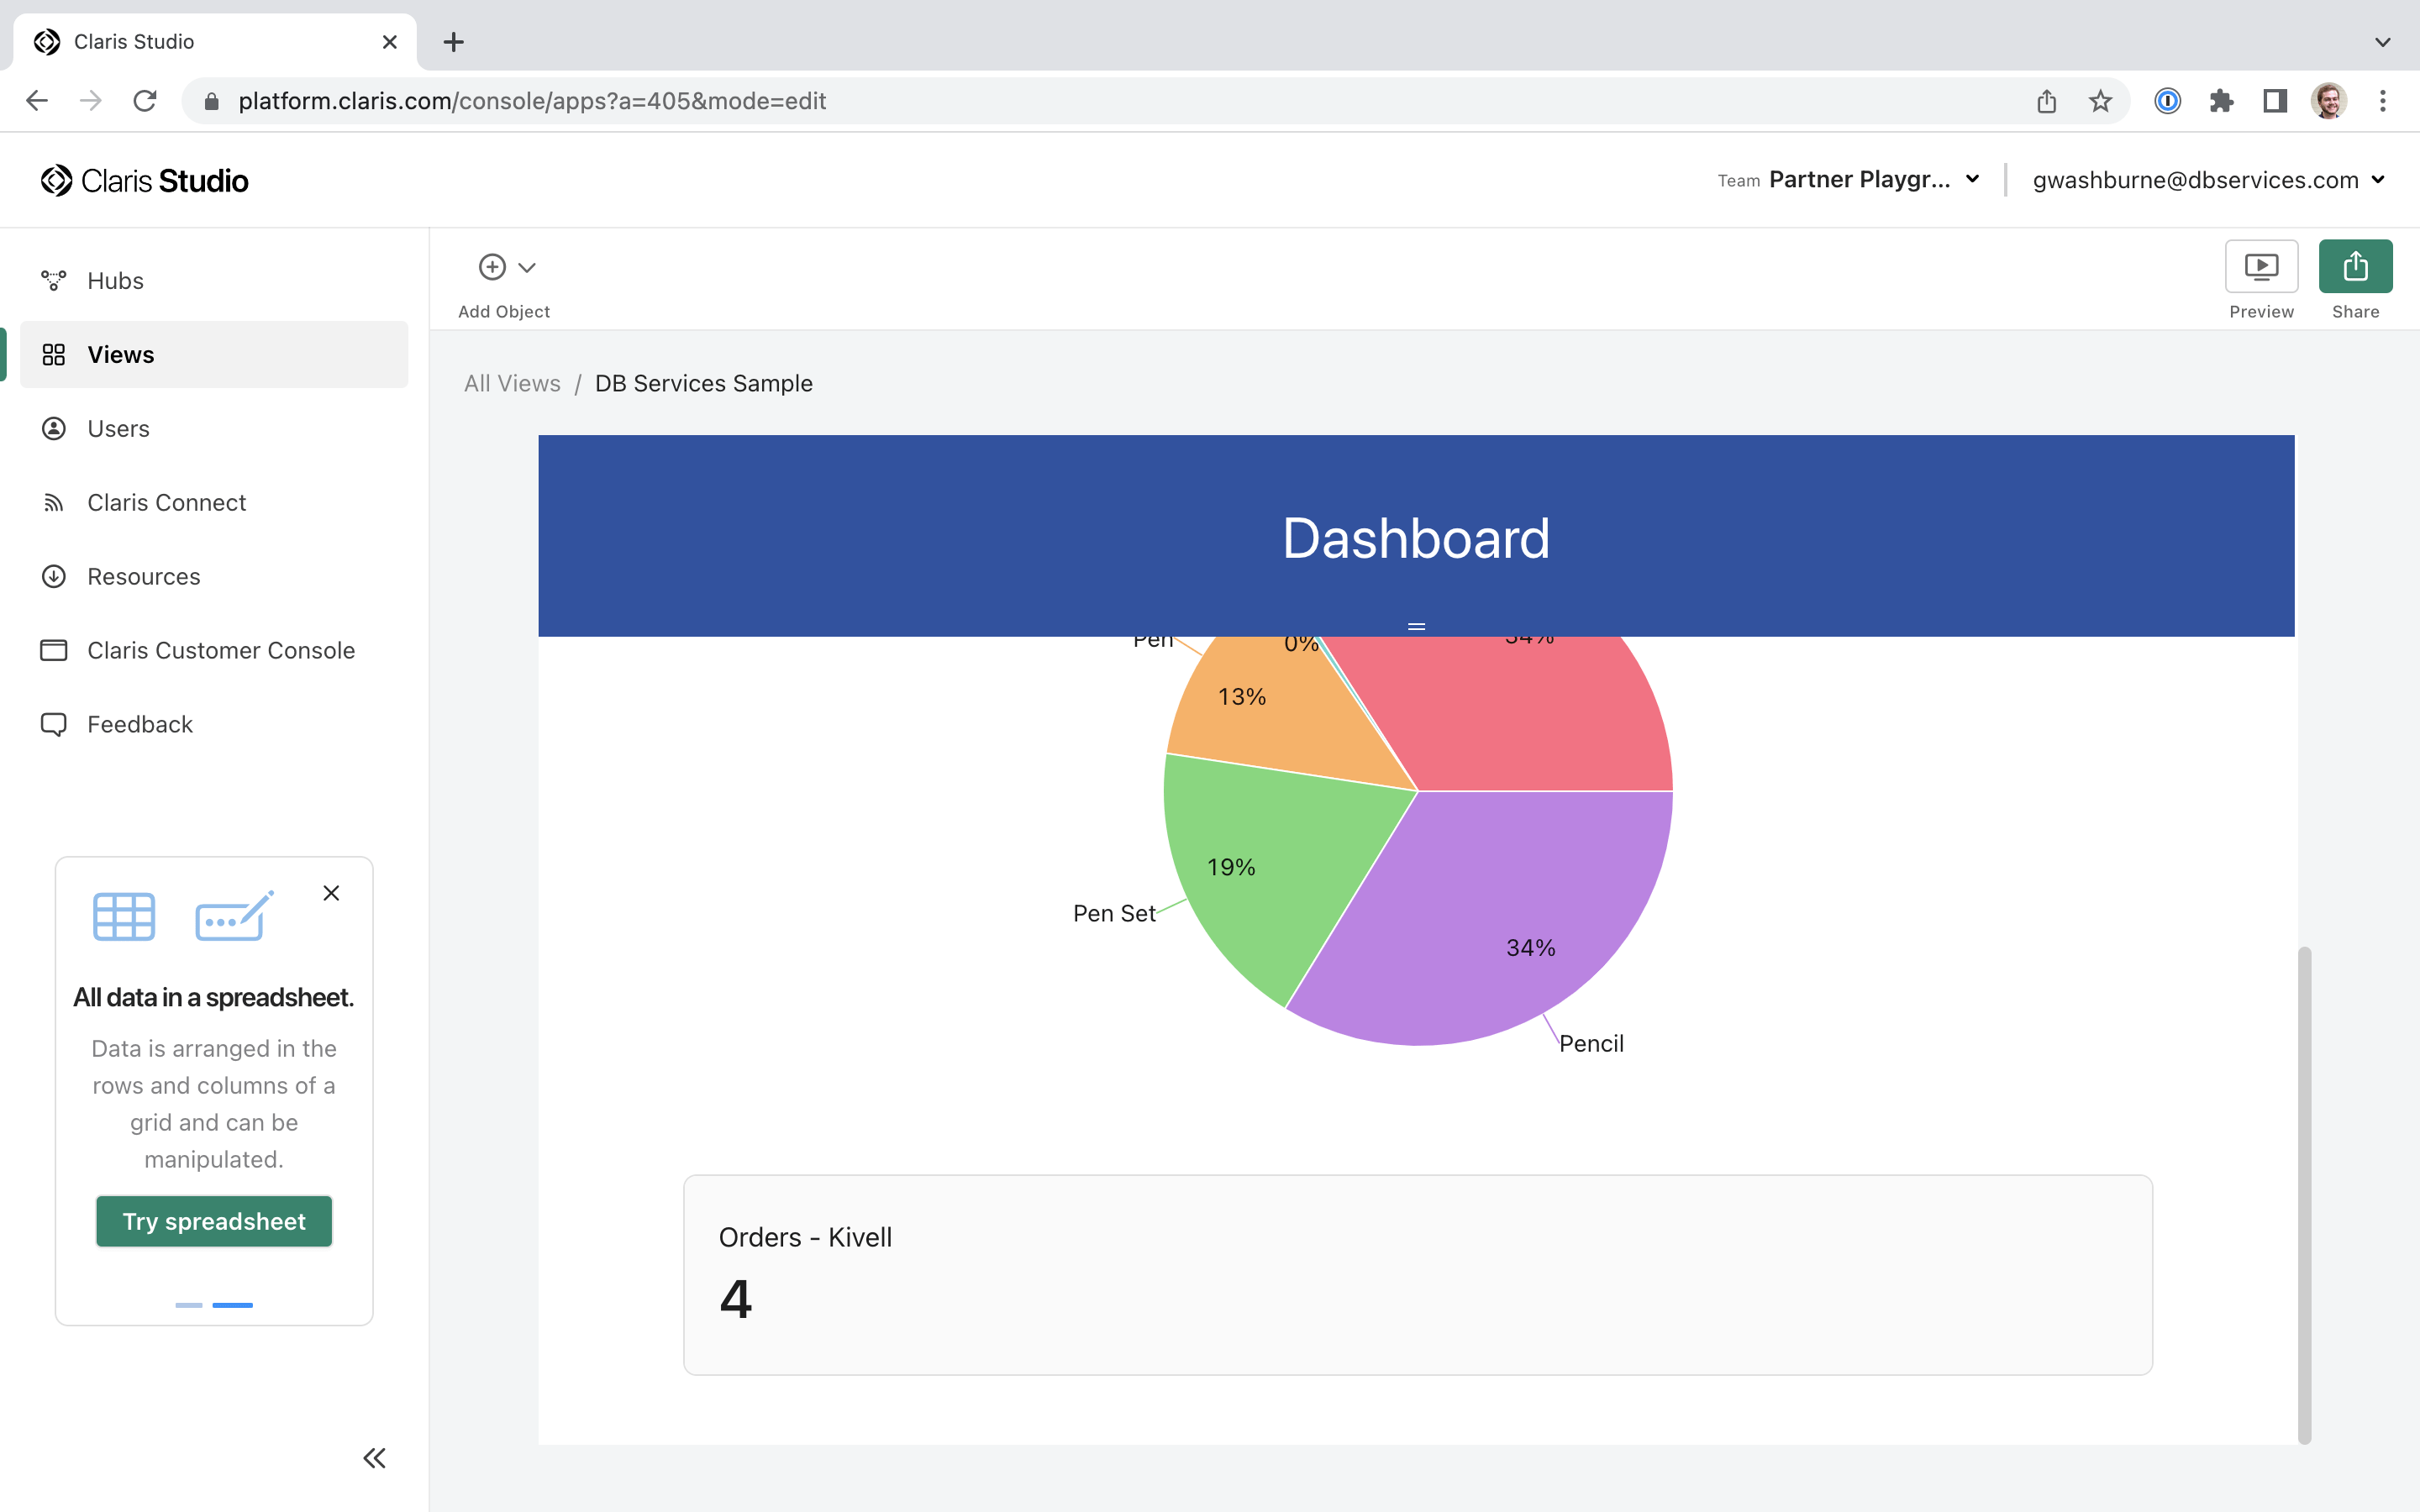 A Filtered and Titled Clairs Studio Dashboard Summary